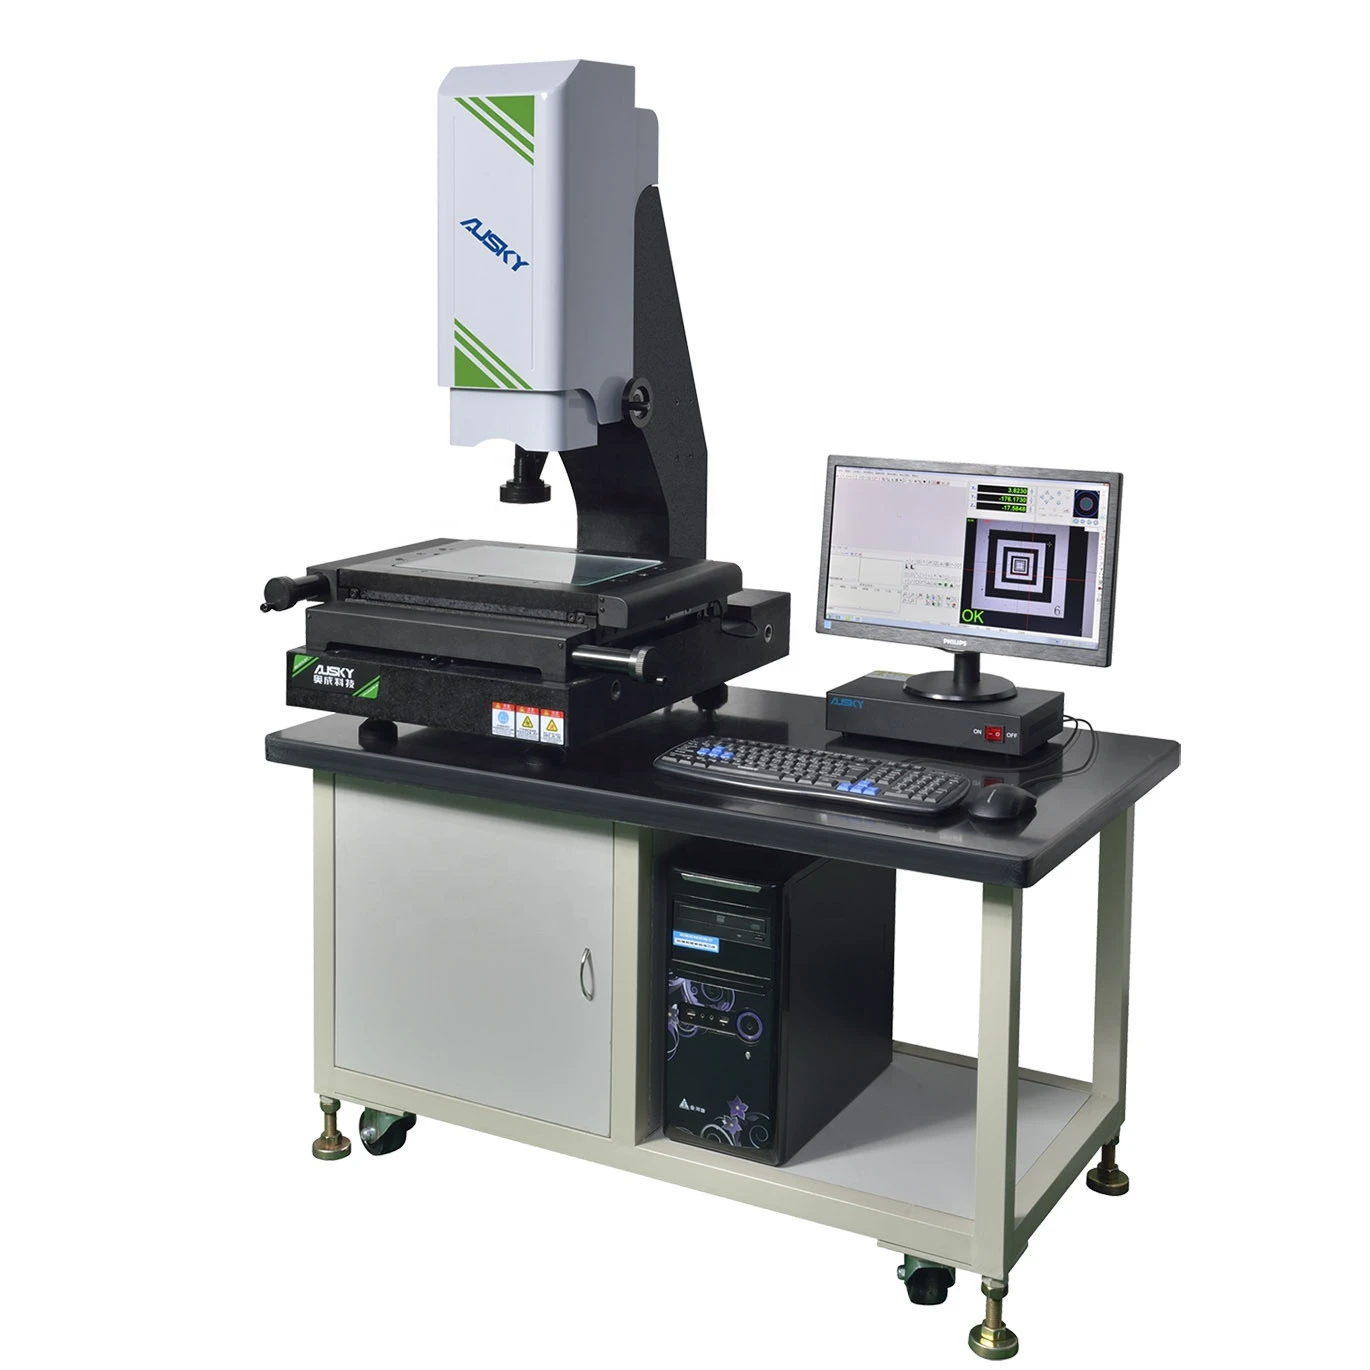 Own Factory Advanced  Manual Operated Image Measuring Instrument With High Precision